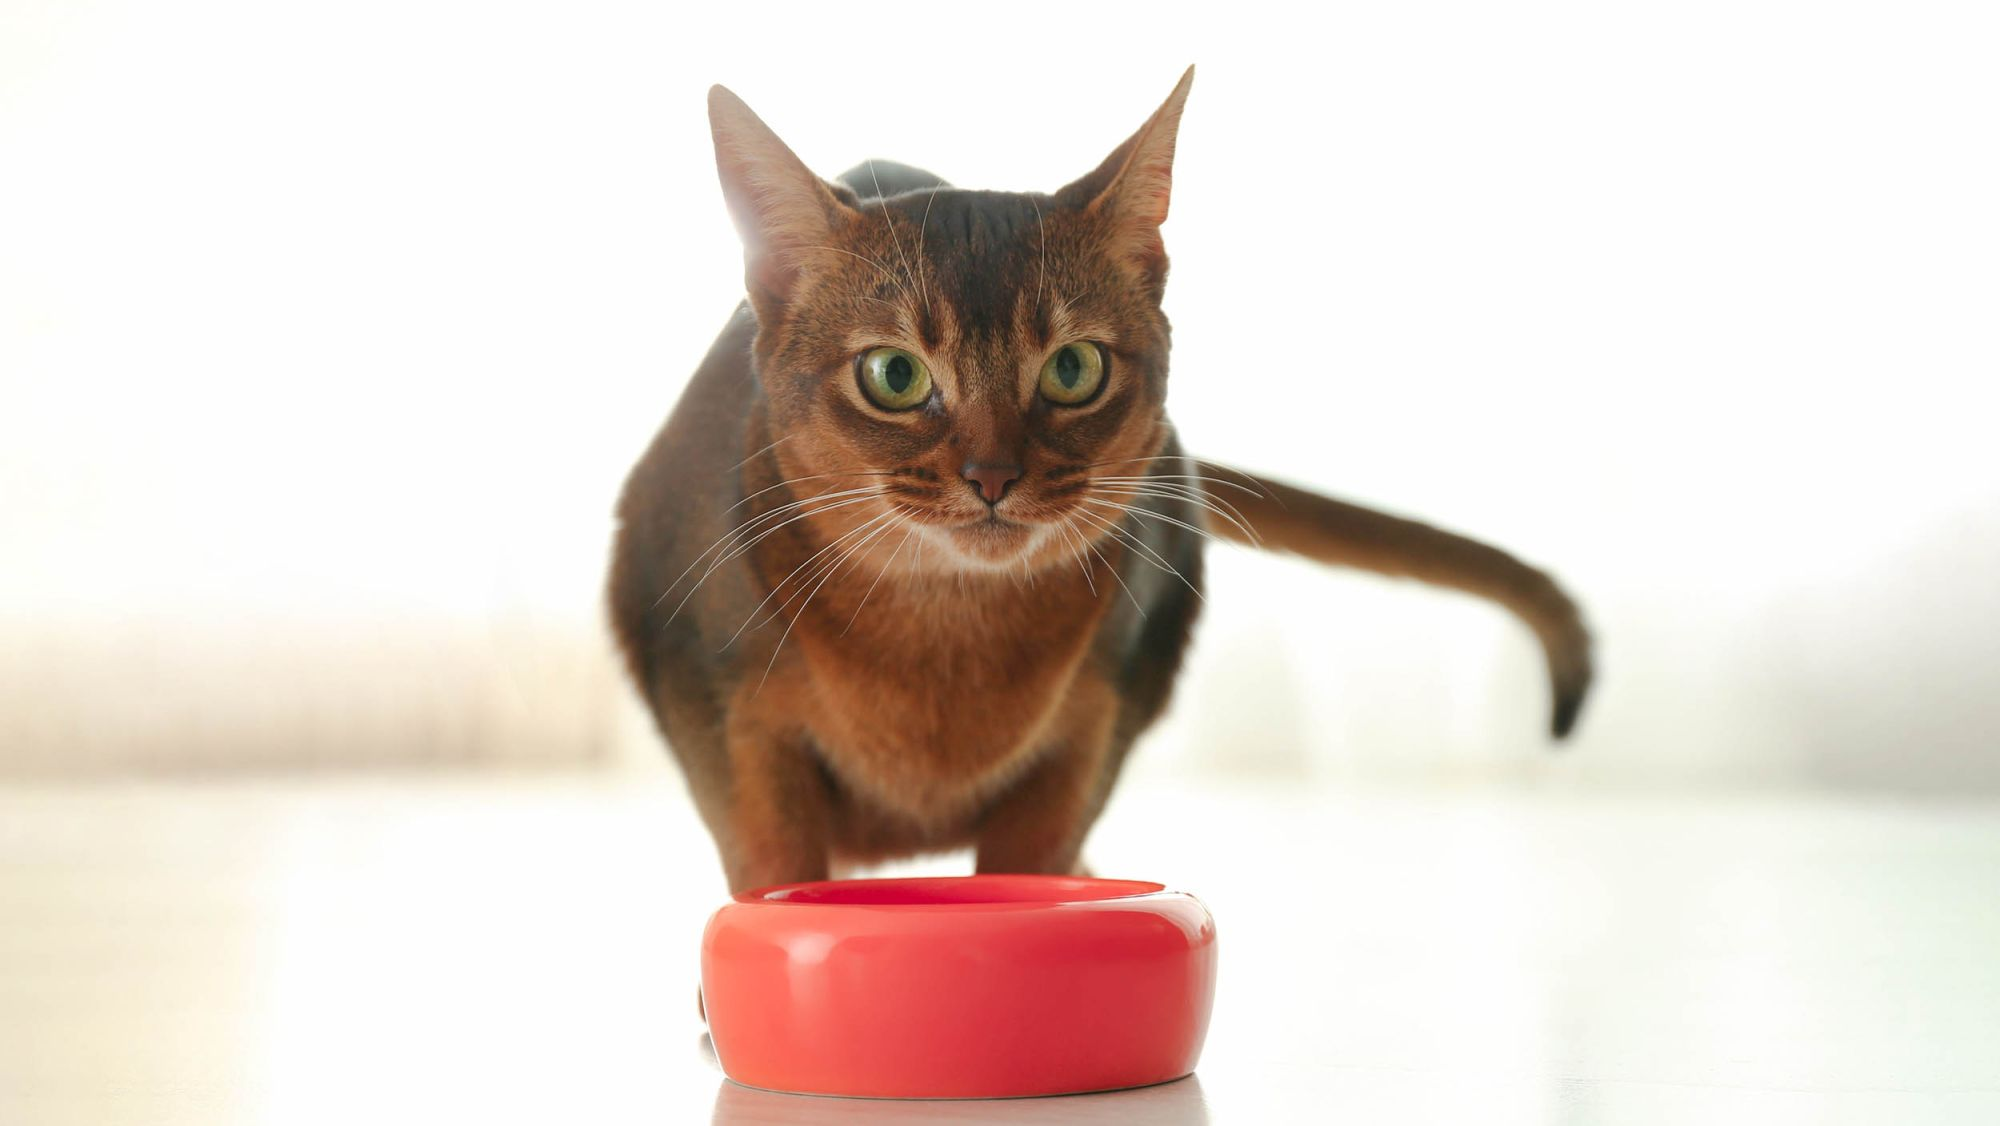 Cat standing in front of red bowl